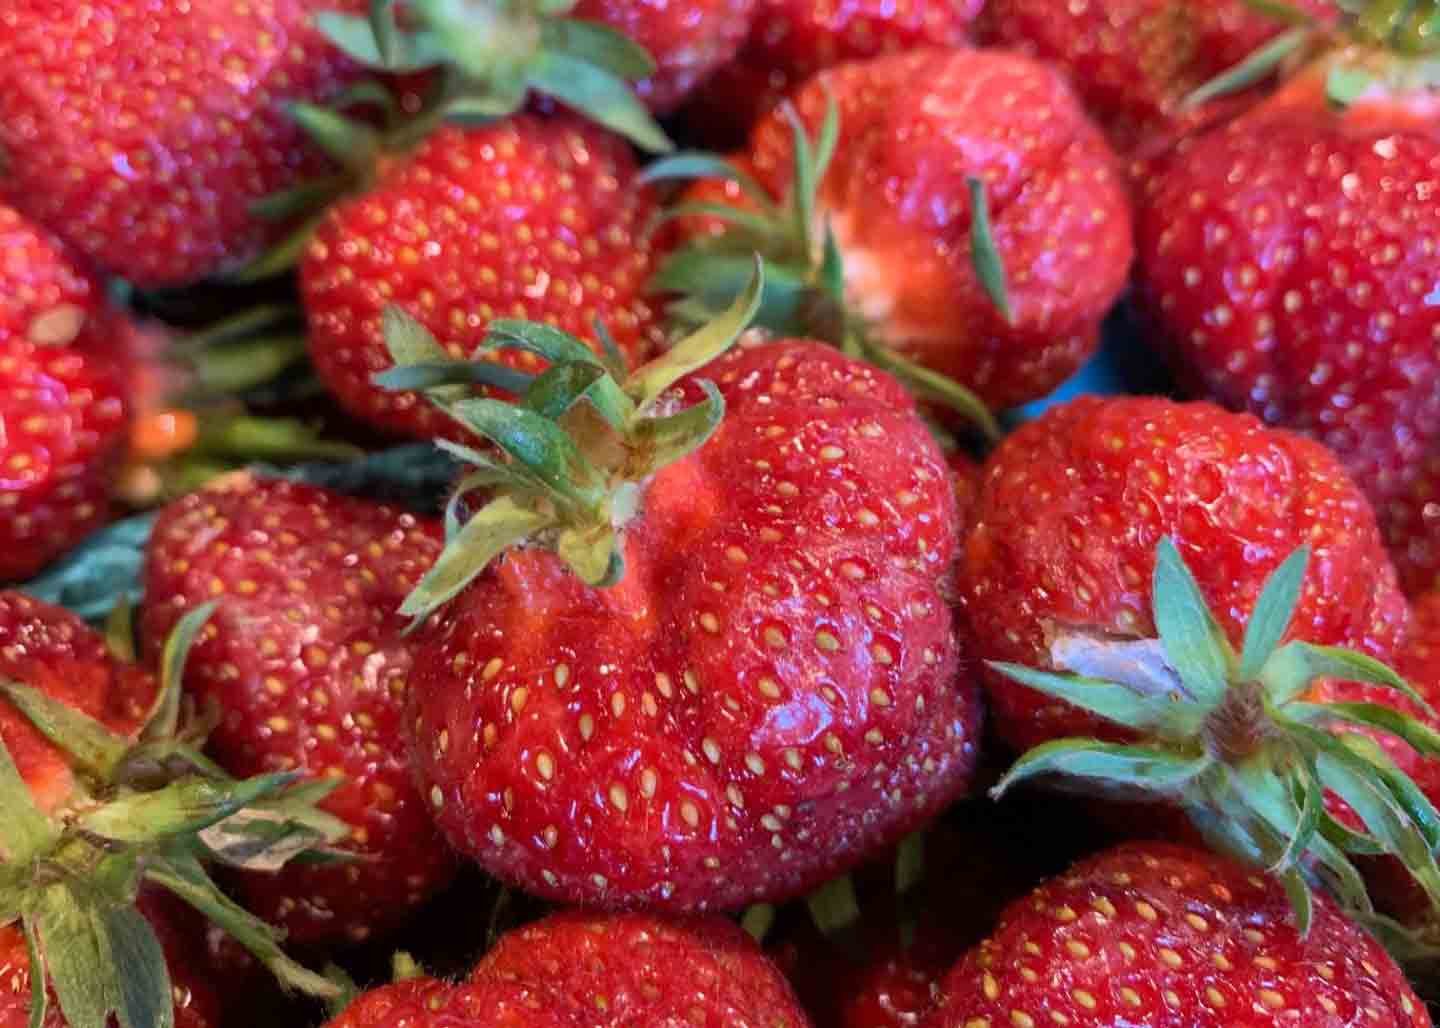 Strawberries in the farm stand of Horse Creek Farms